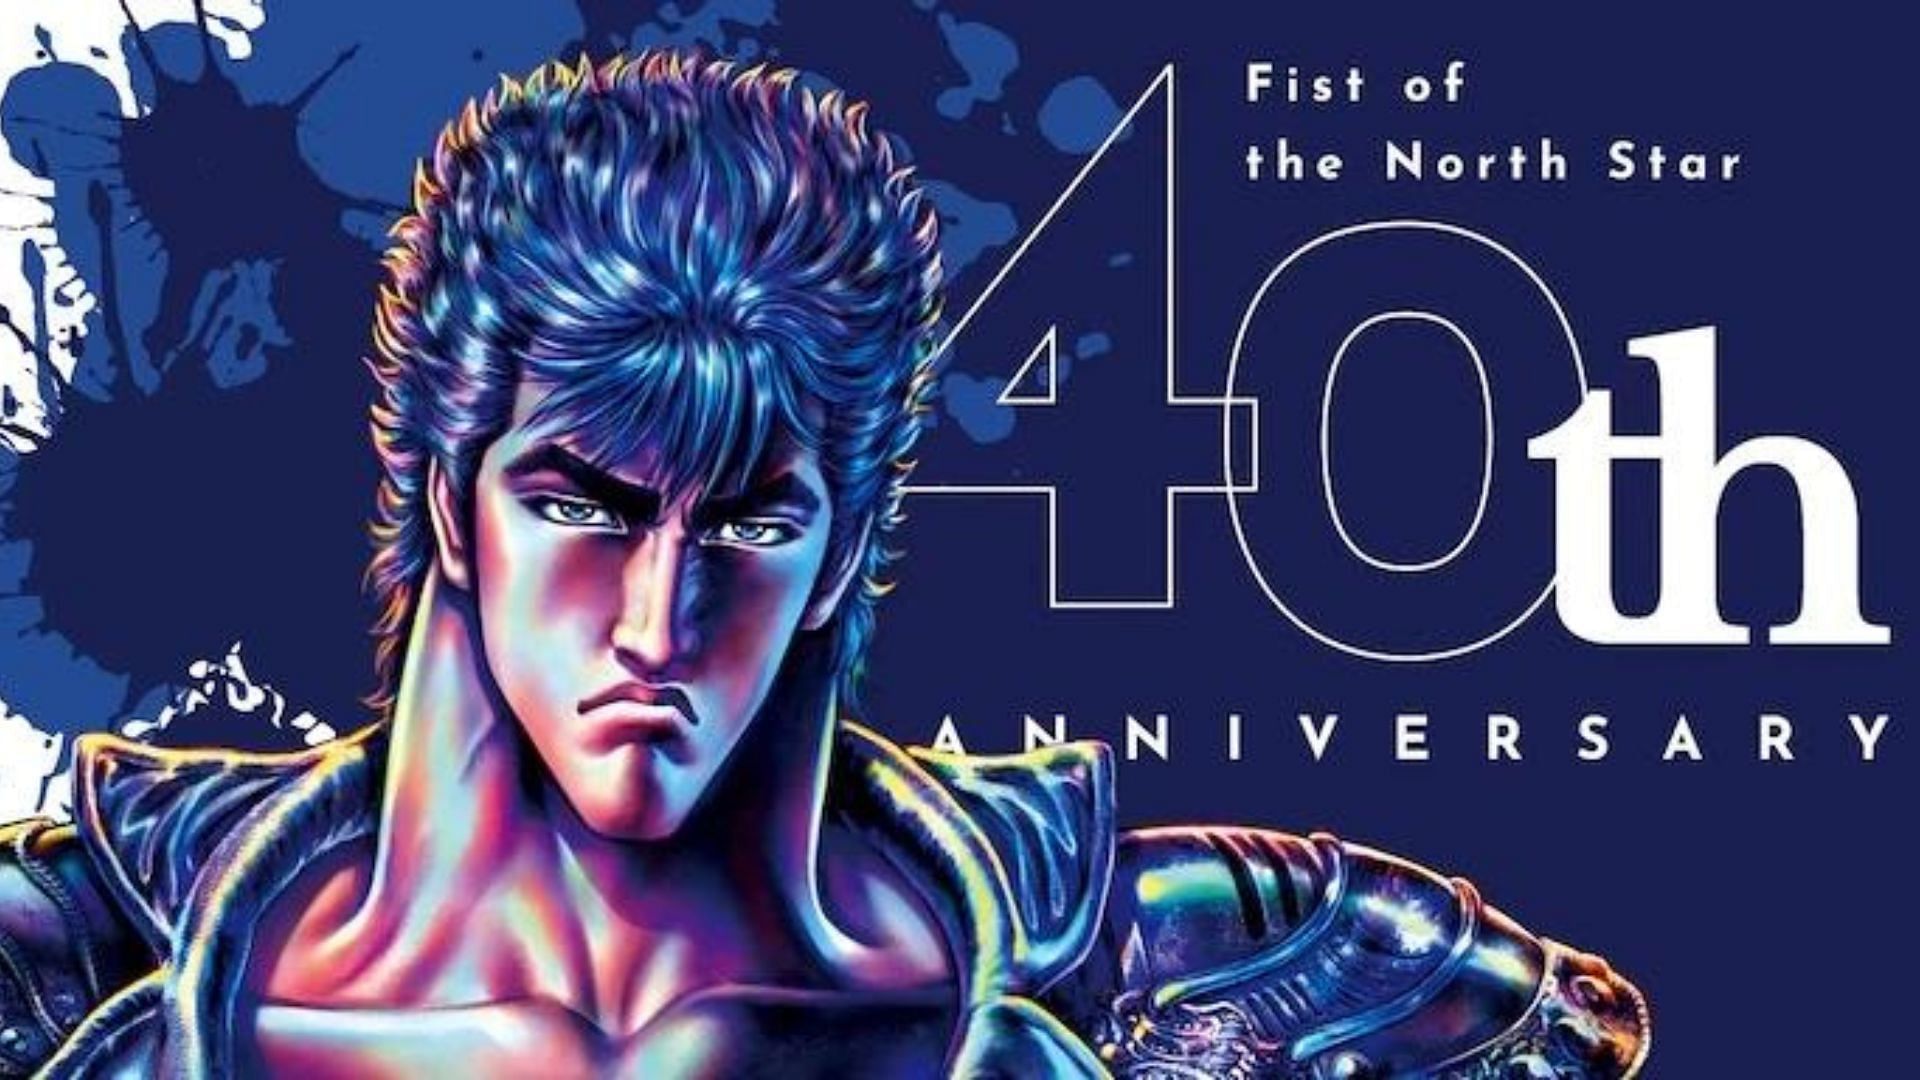 Fist Of The North Star:” From Manga to Anime to Live Action | by Filmofile  | Medium